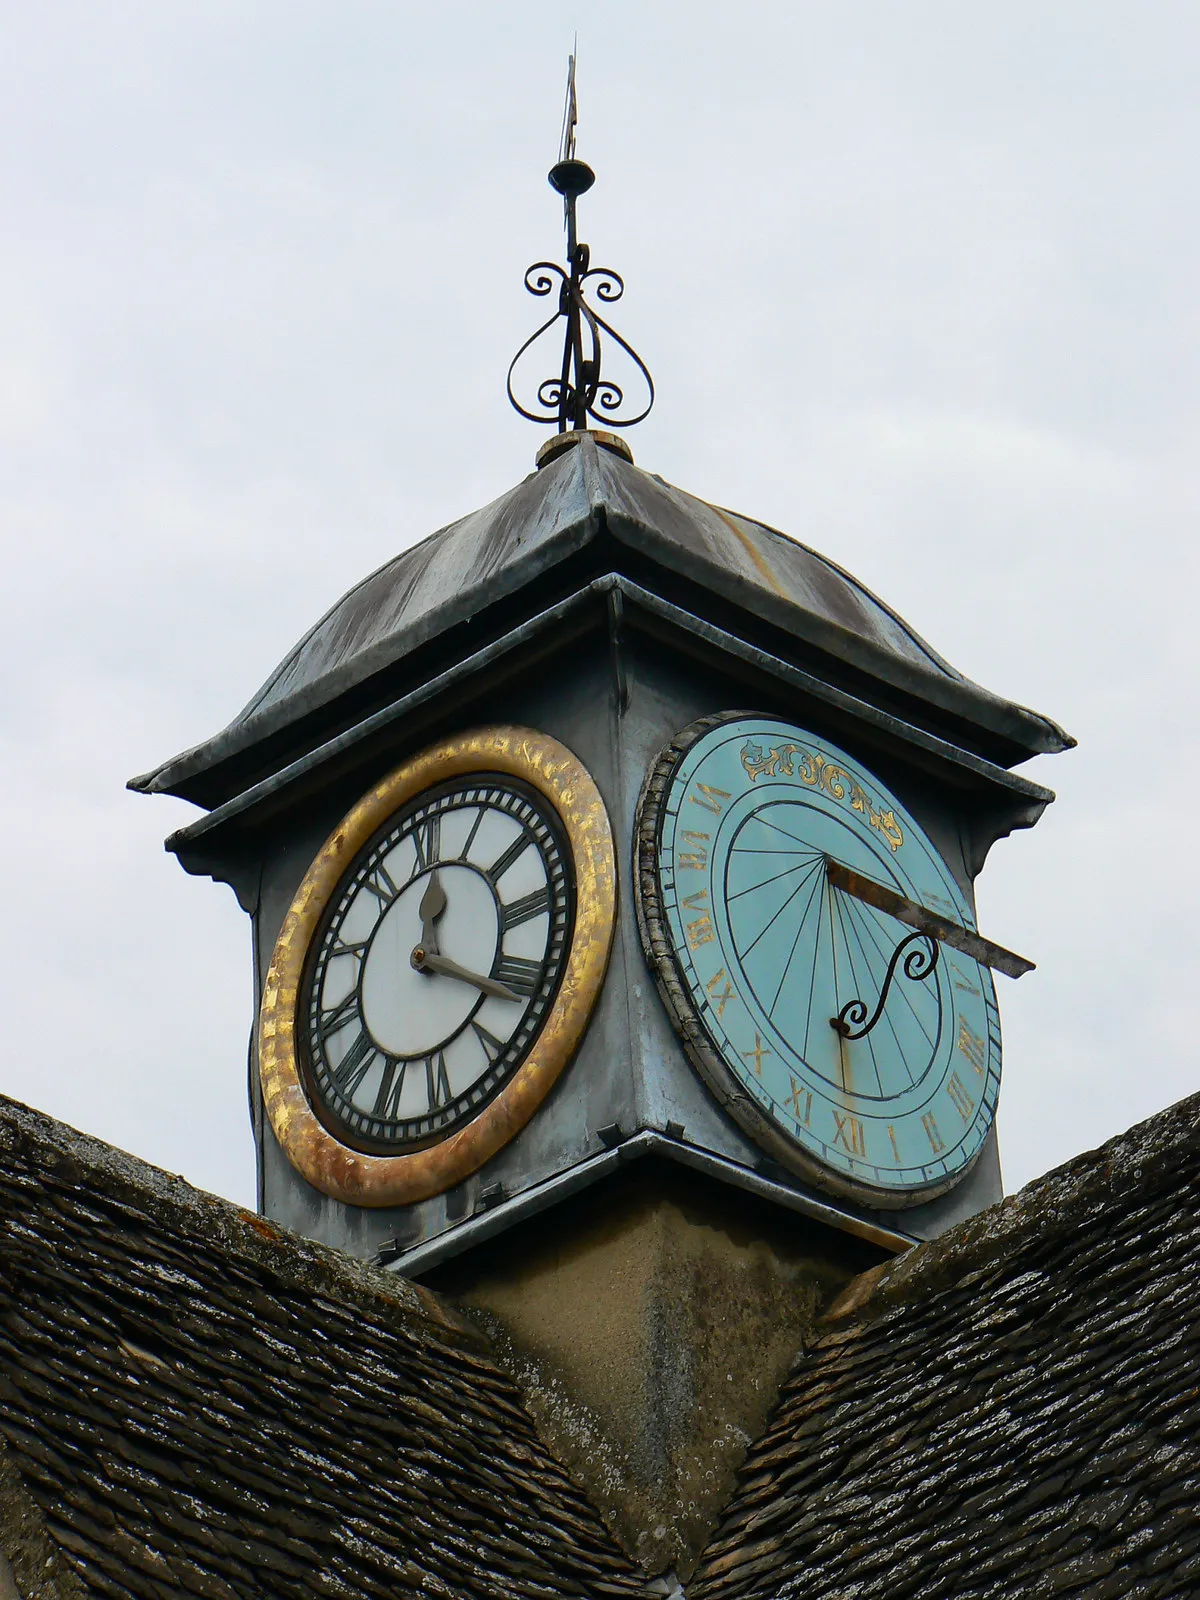 Photo showing: Timepieces, The Buttercross, Witney